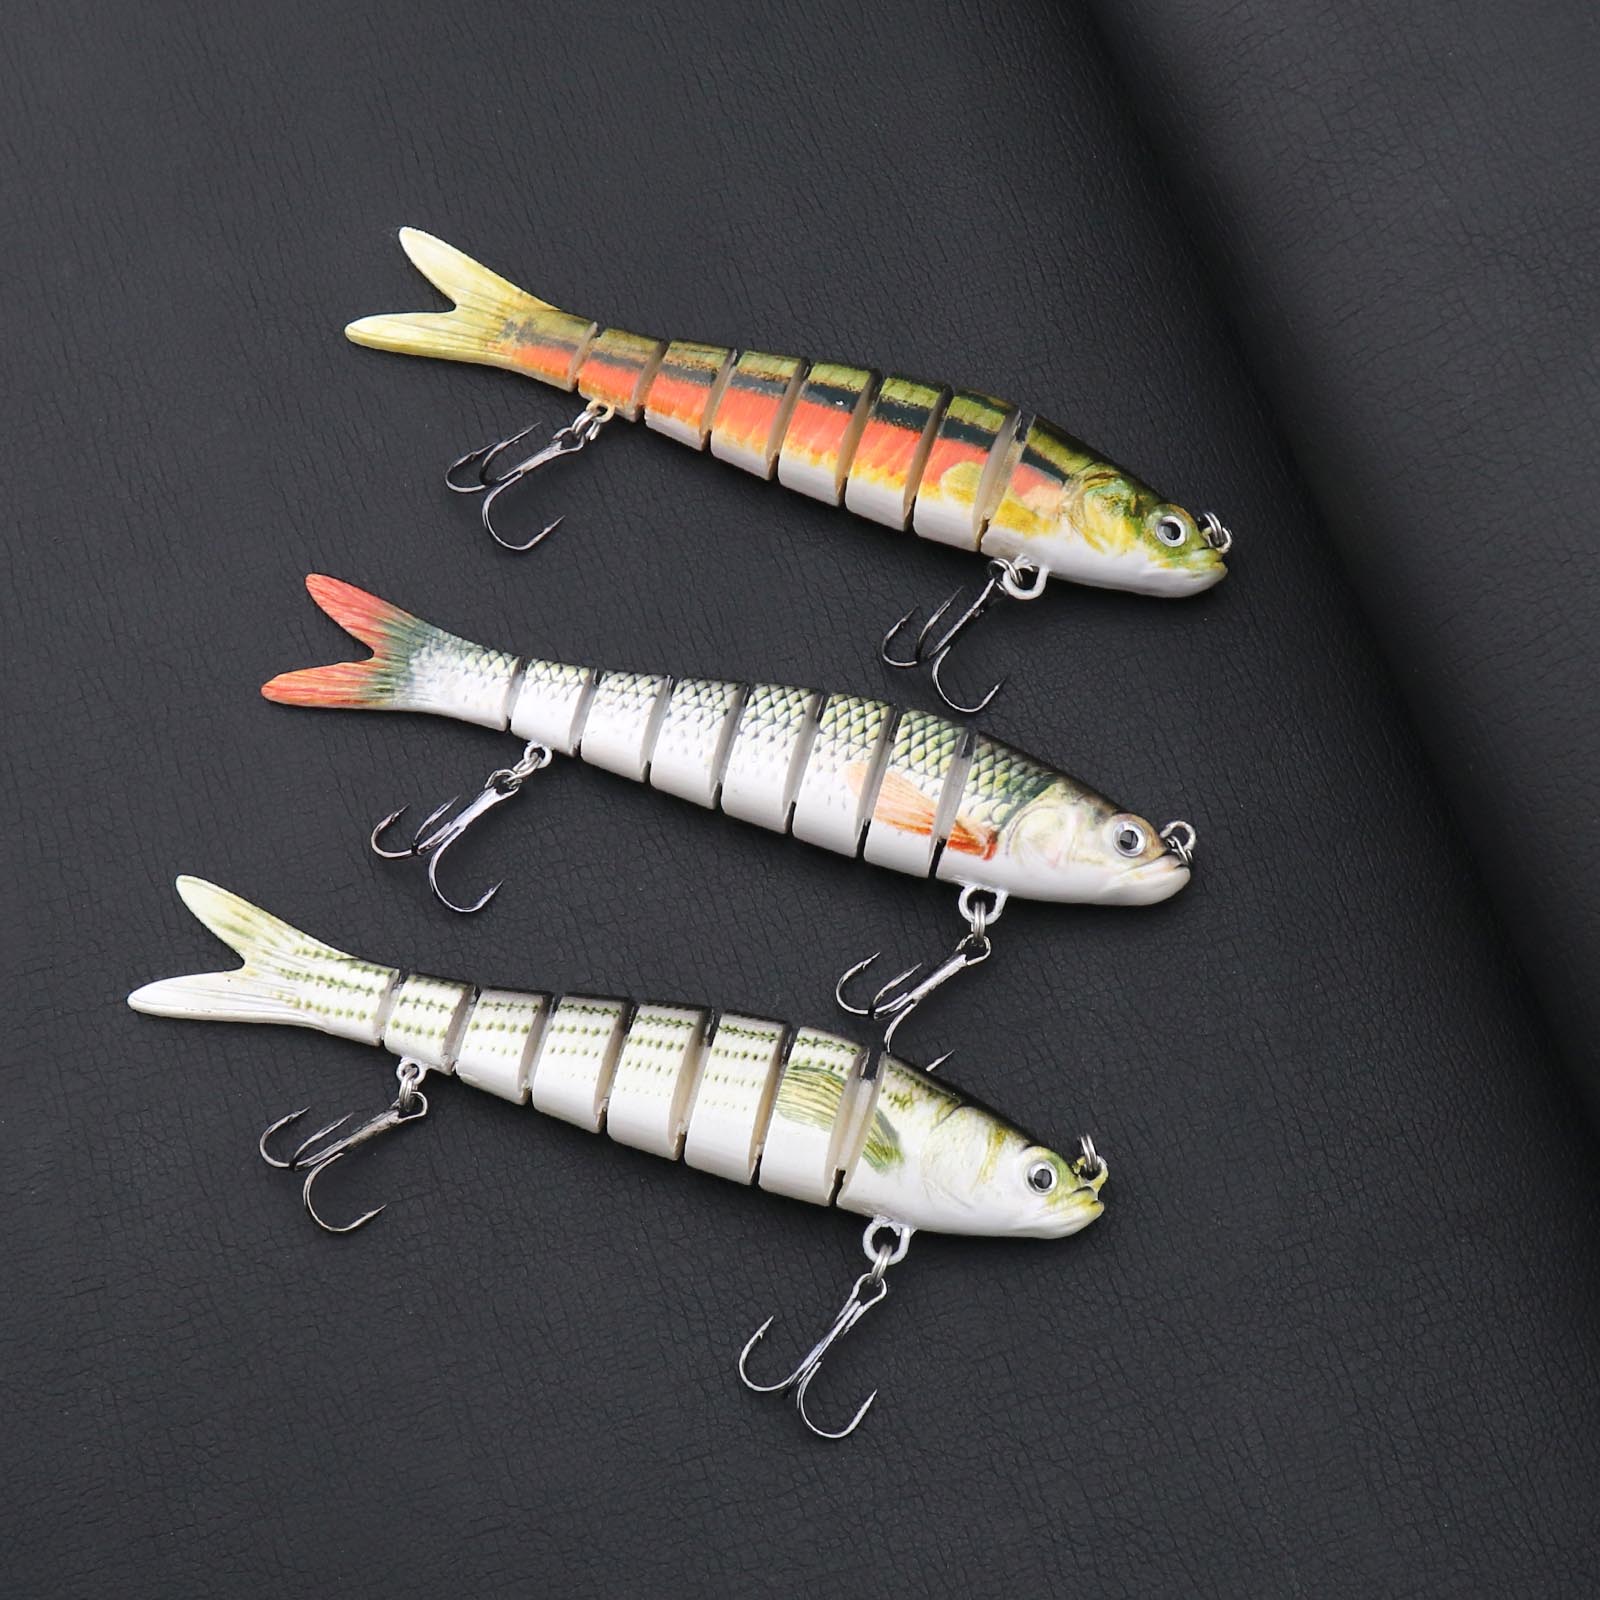 3x Fishing Lures Bass Lures Multi Jointed Artificial Bait Segment Swimbaits Lure | eBay